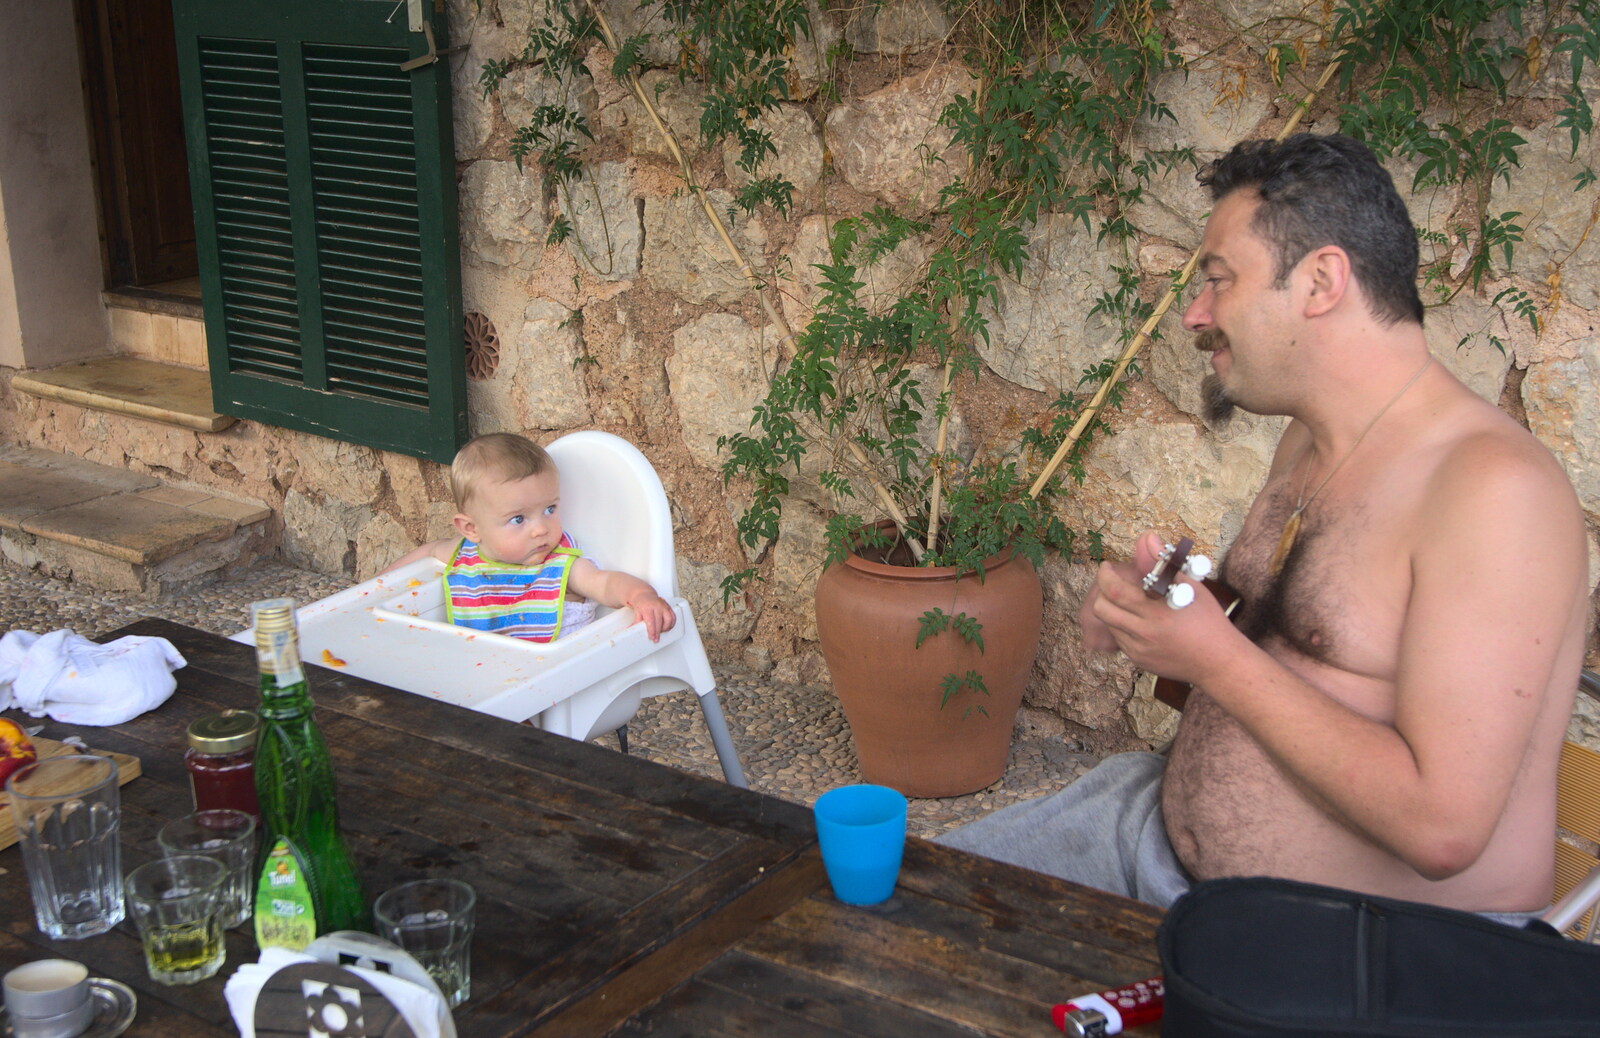 Harry looks suspiciously at Noddy's ukulele from A Trip to Sóller, Mallorca, Spain - 8th-14th September 2012